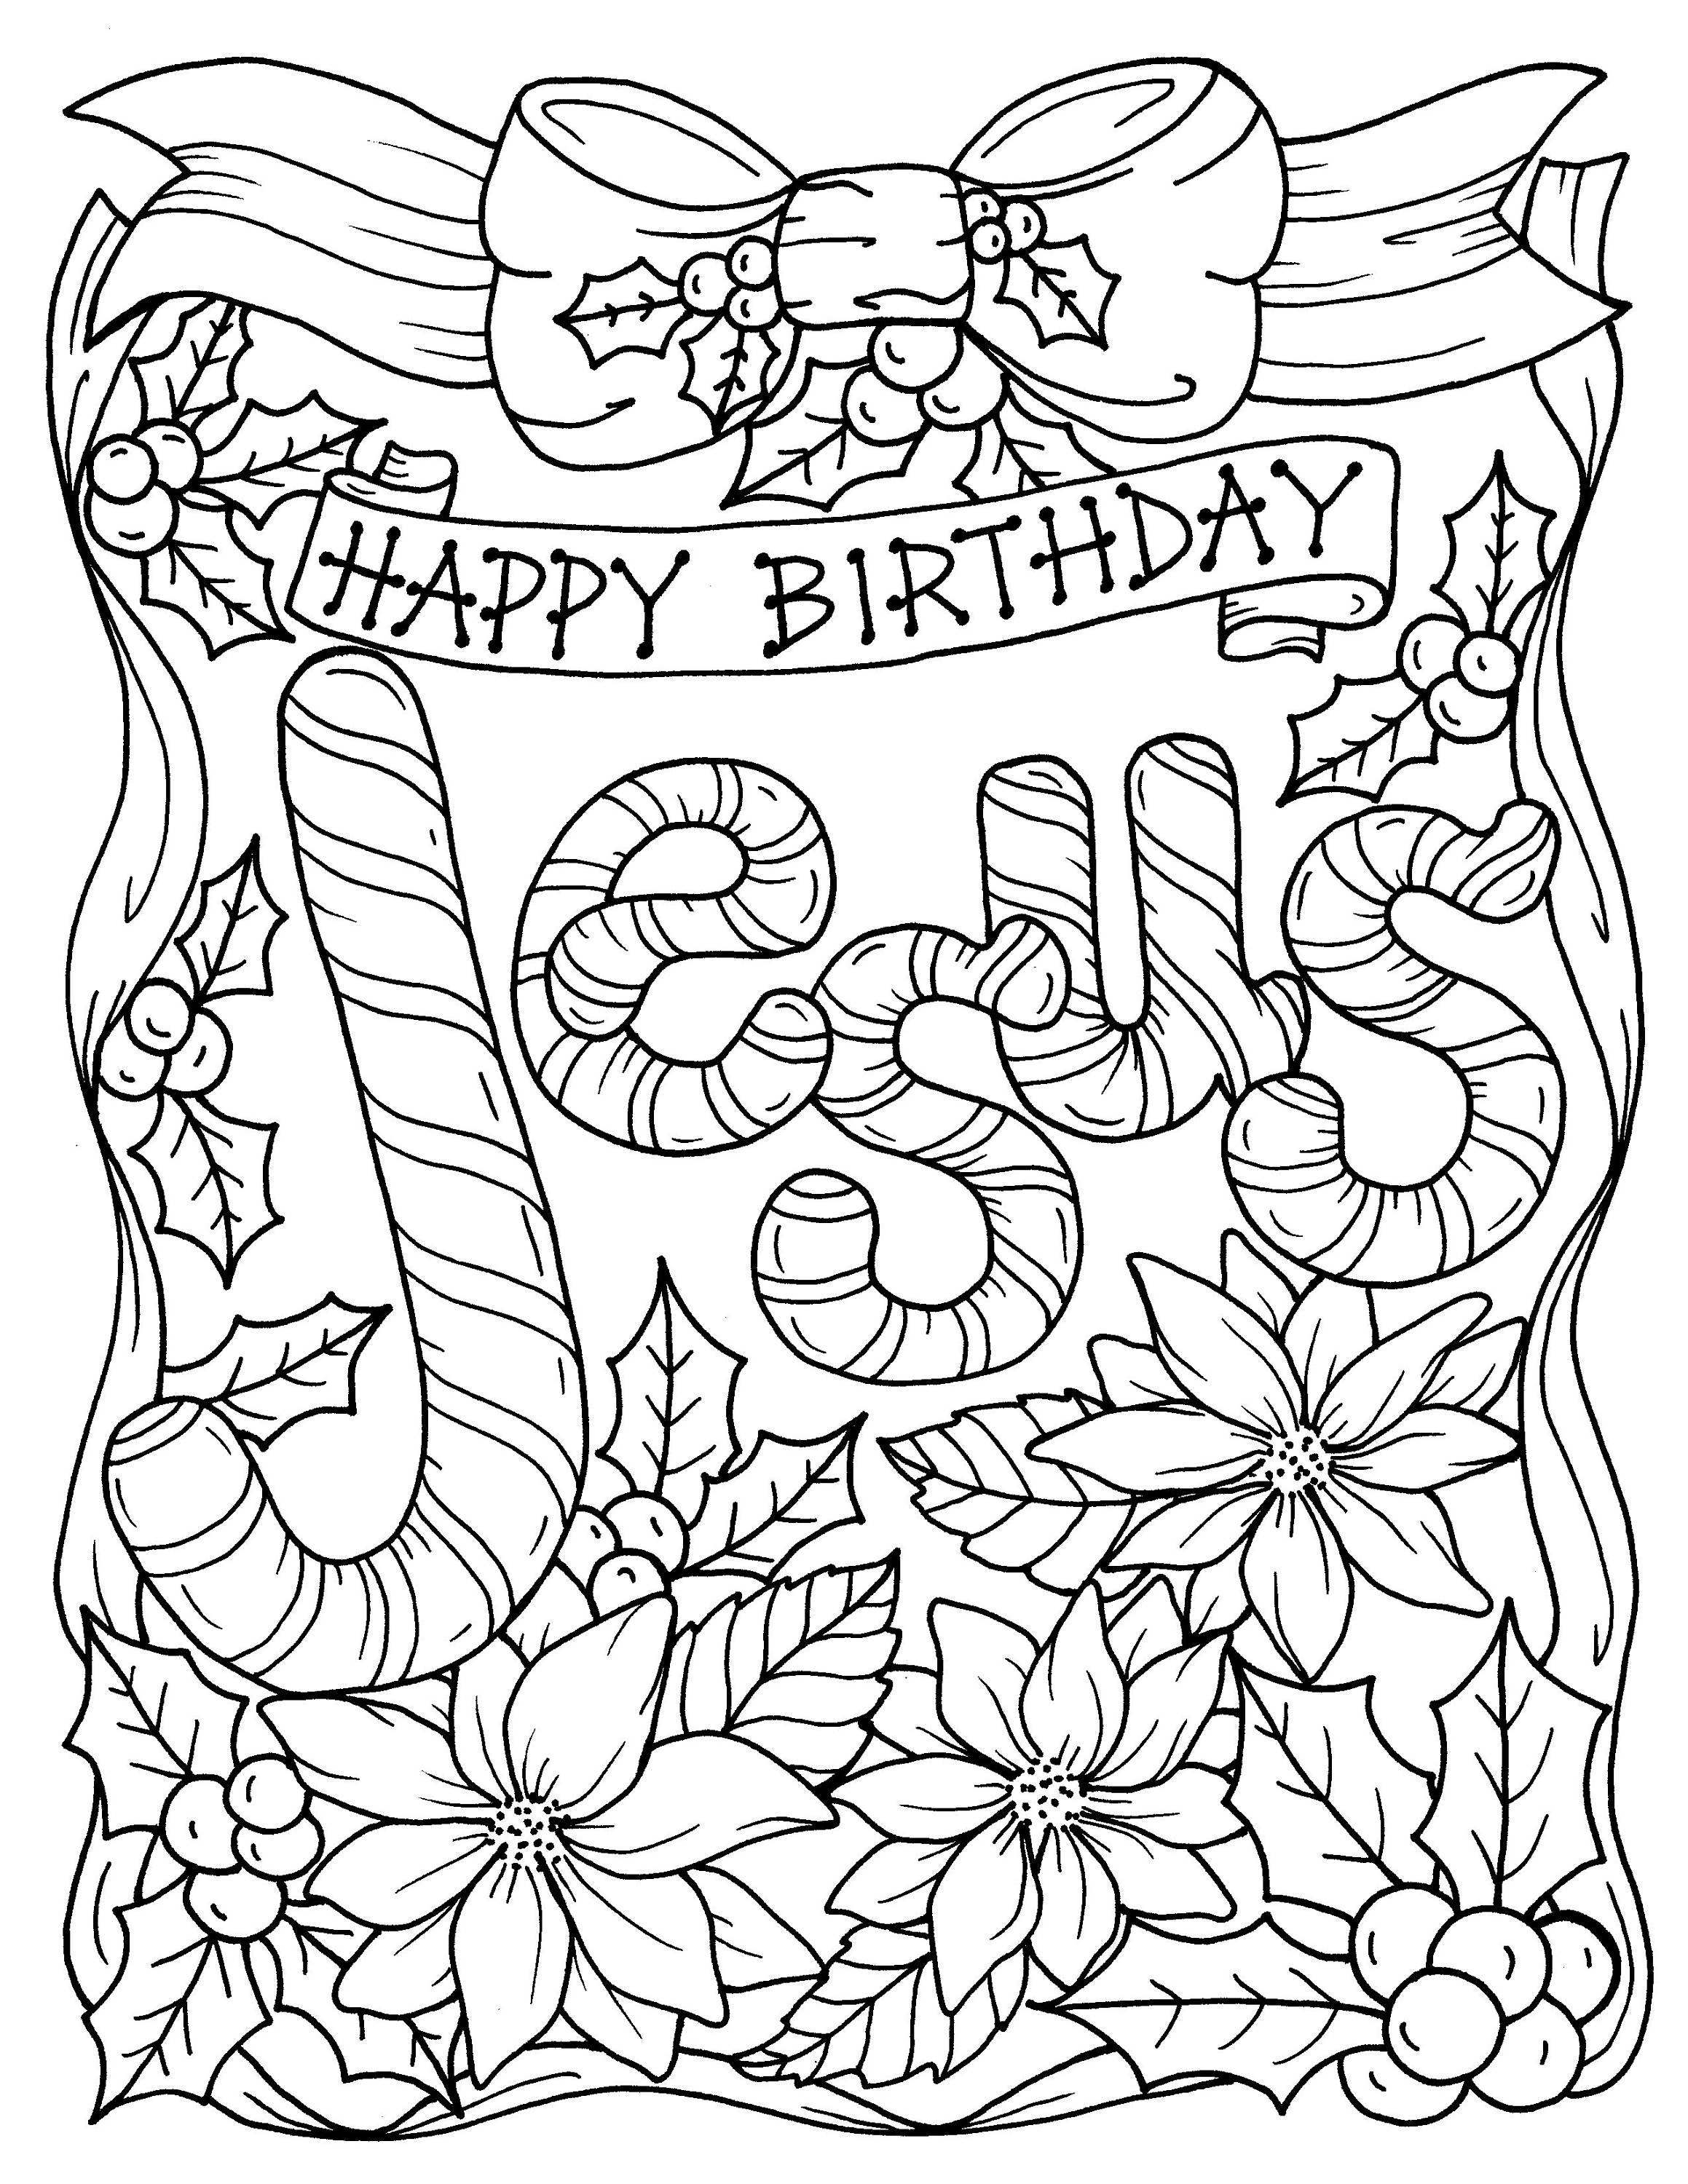 Christian Christmas Coloring Pages Free